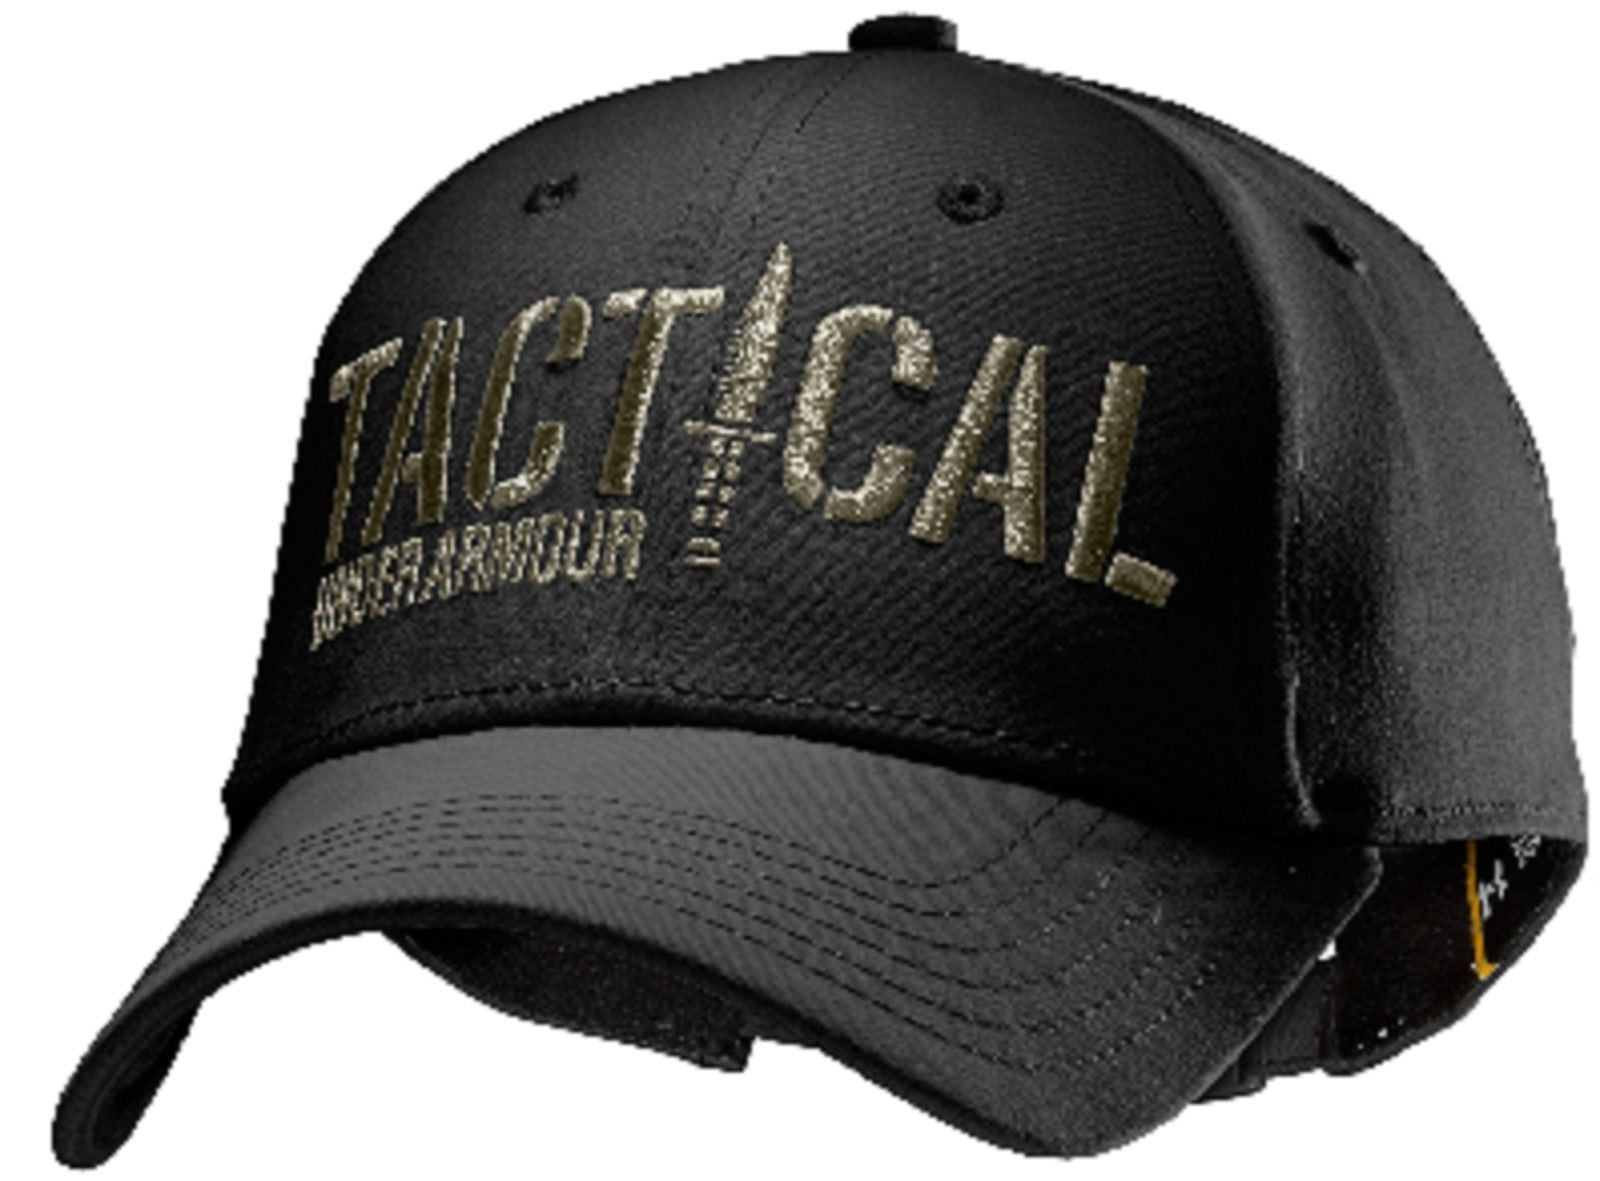 under armour tactical hat velcro